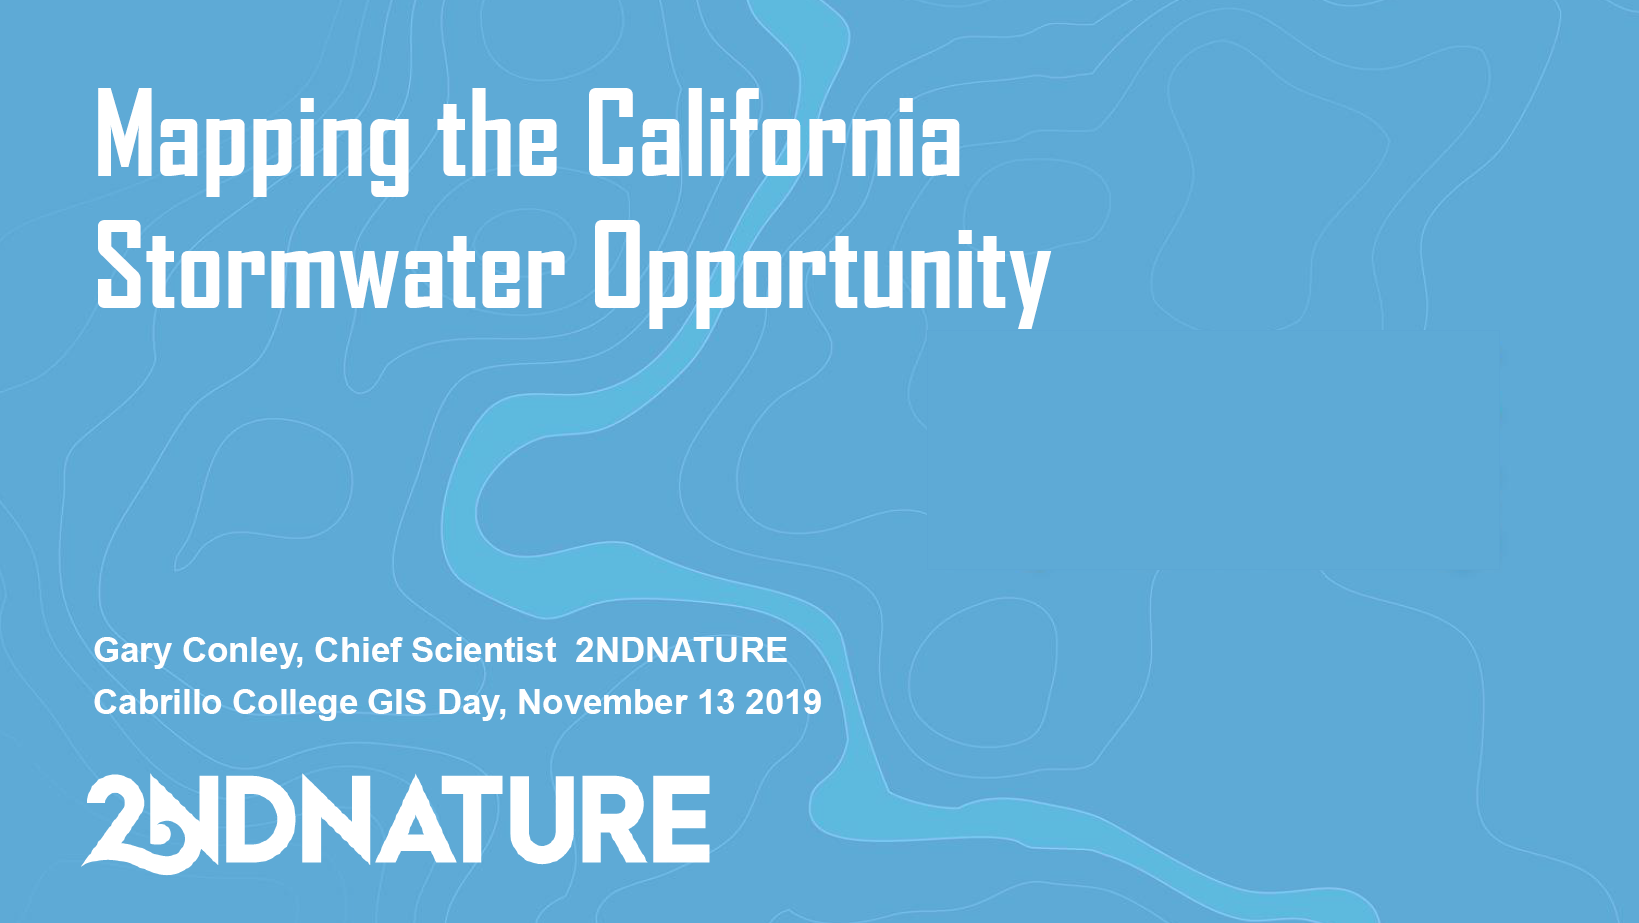 Mapping California's Stormwater Opportunity